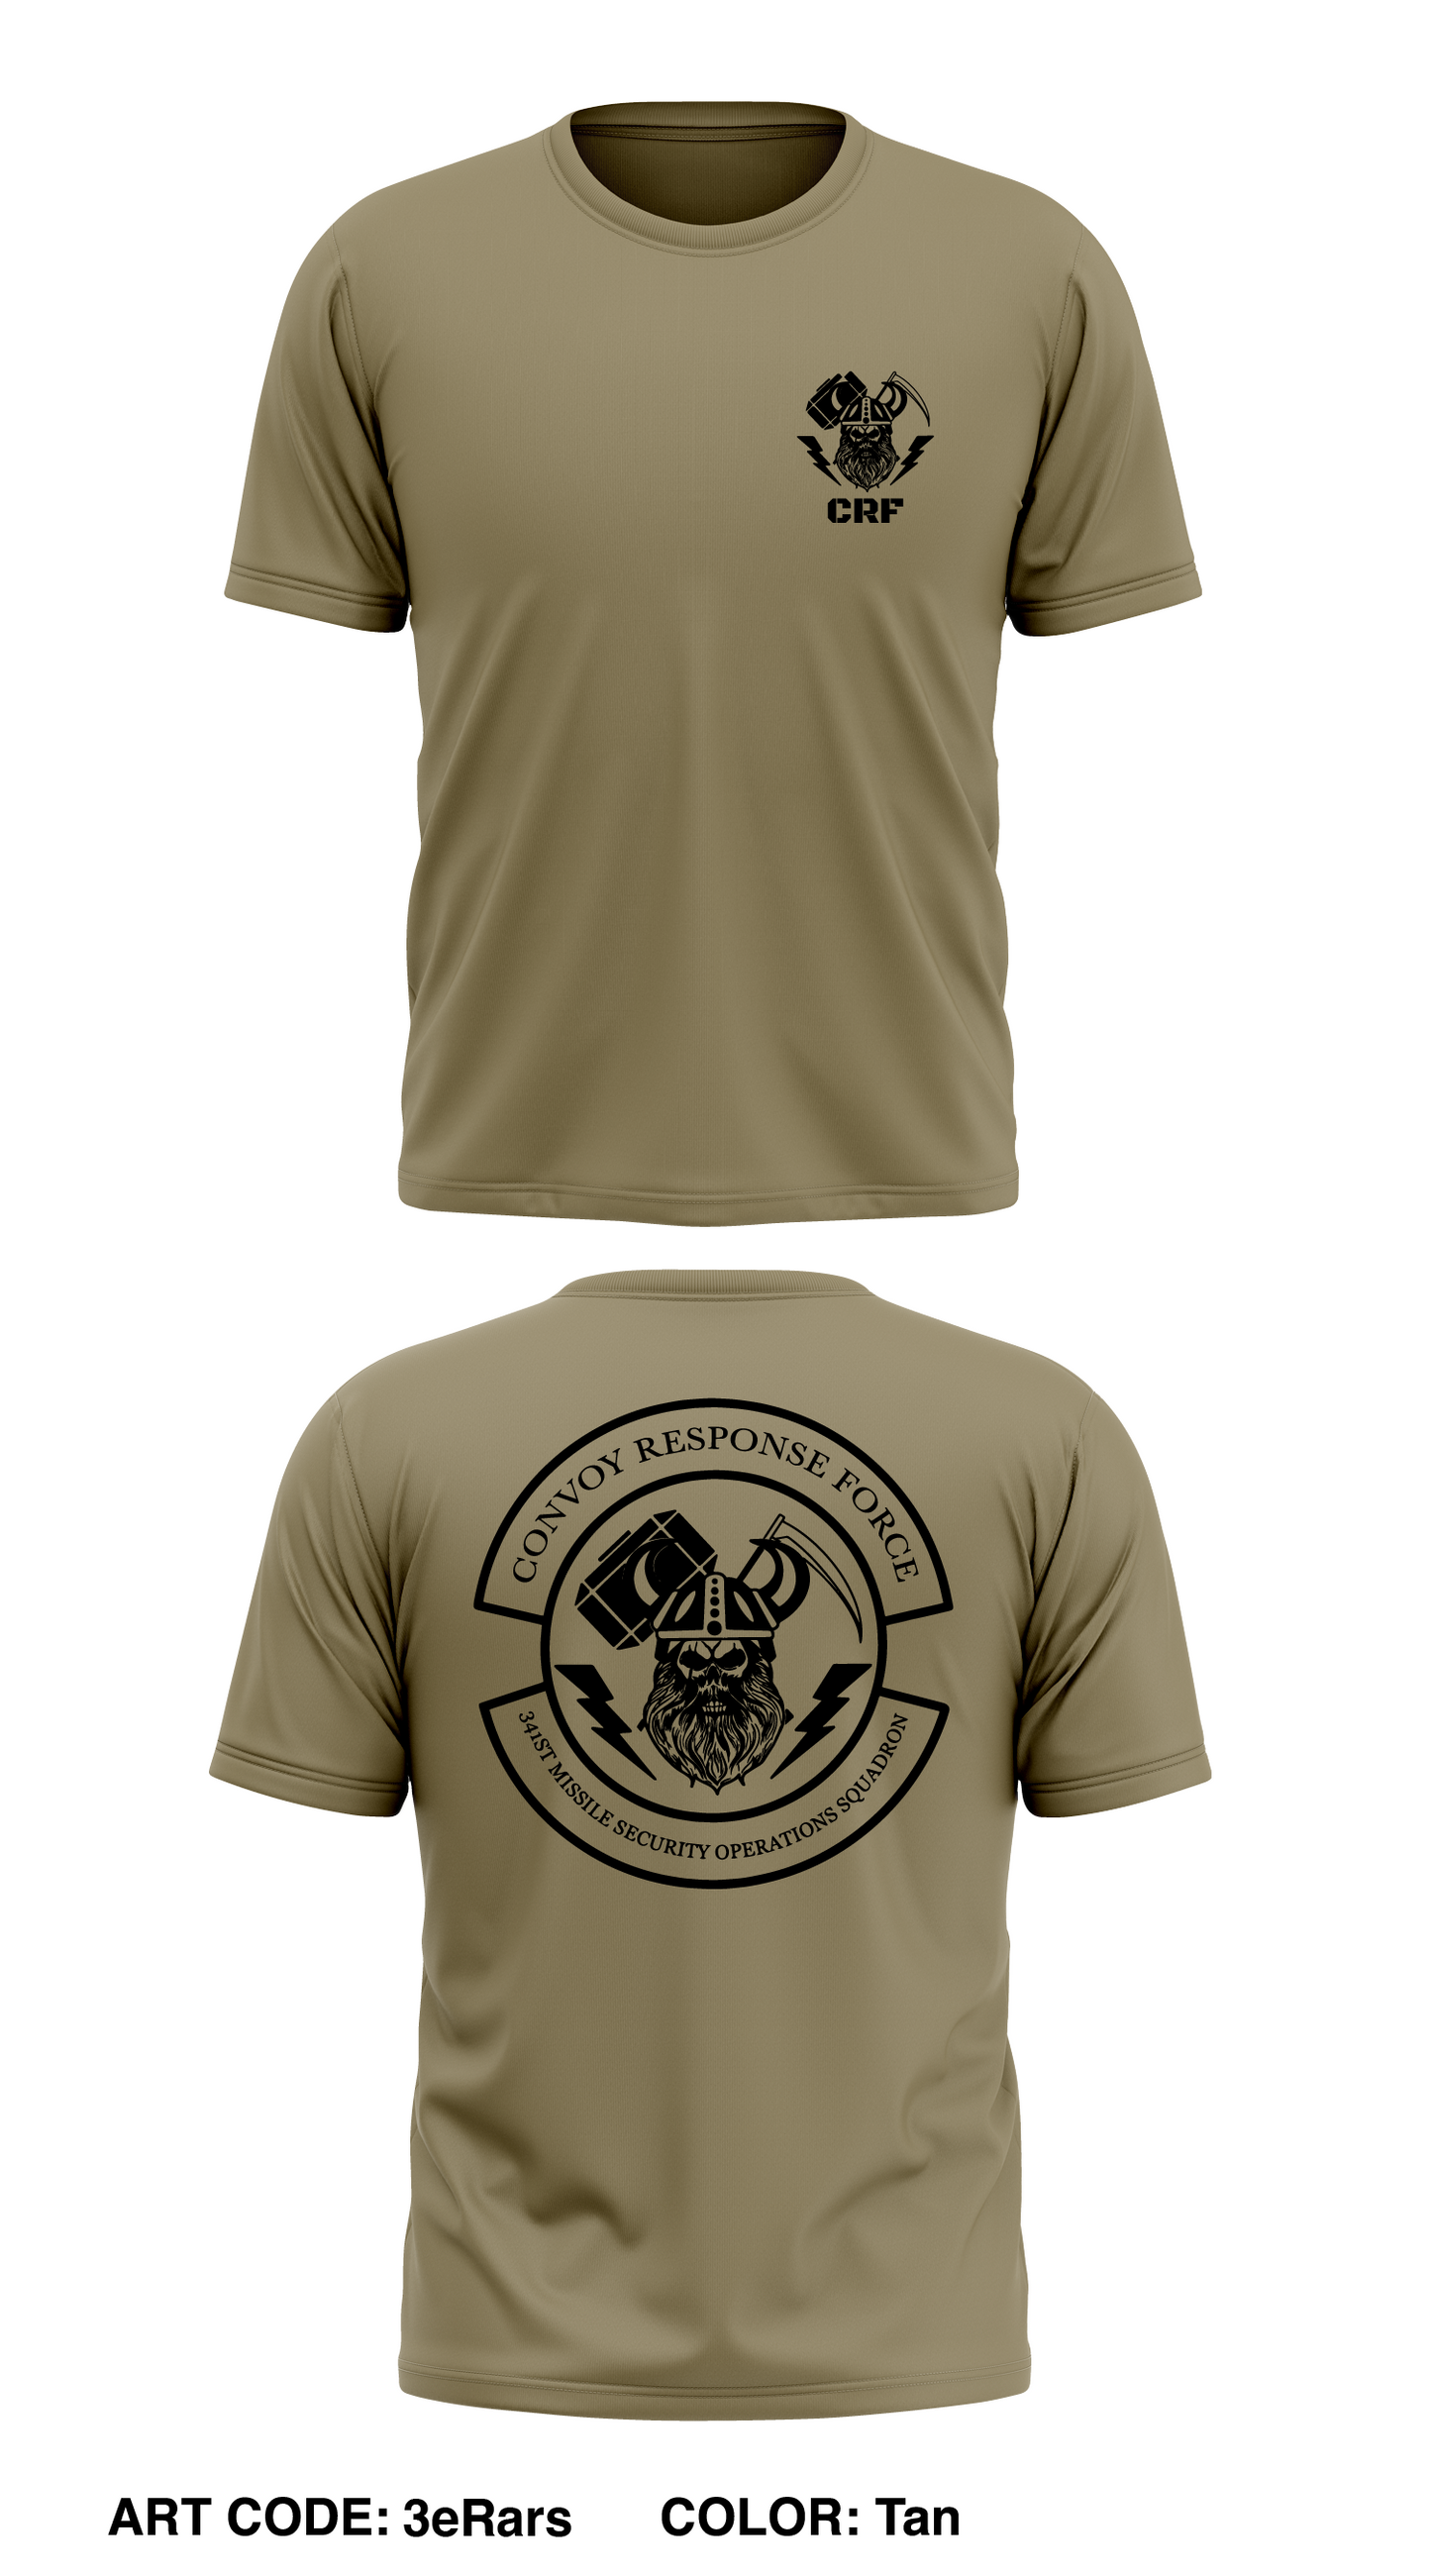 341st Missile Security Operations Squadron Store 1 Core Men's SS Performance Tee - 3eRars